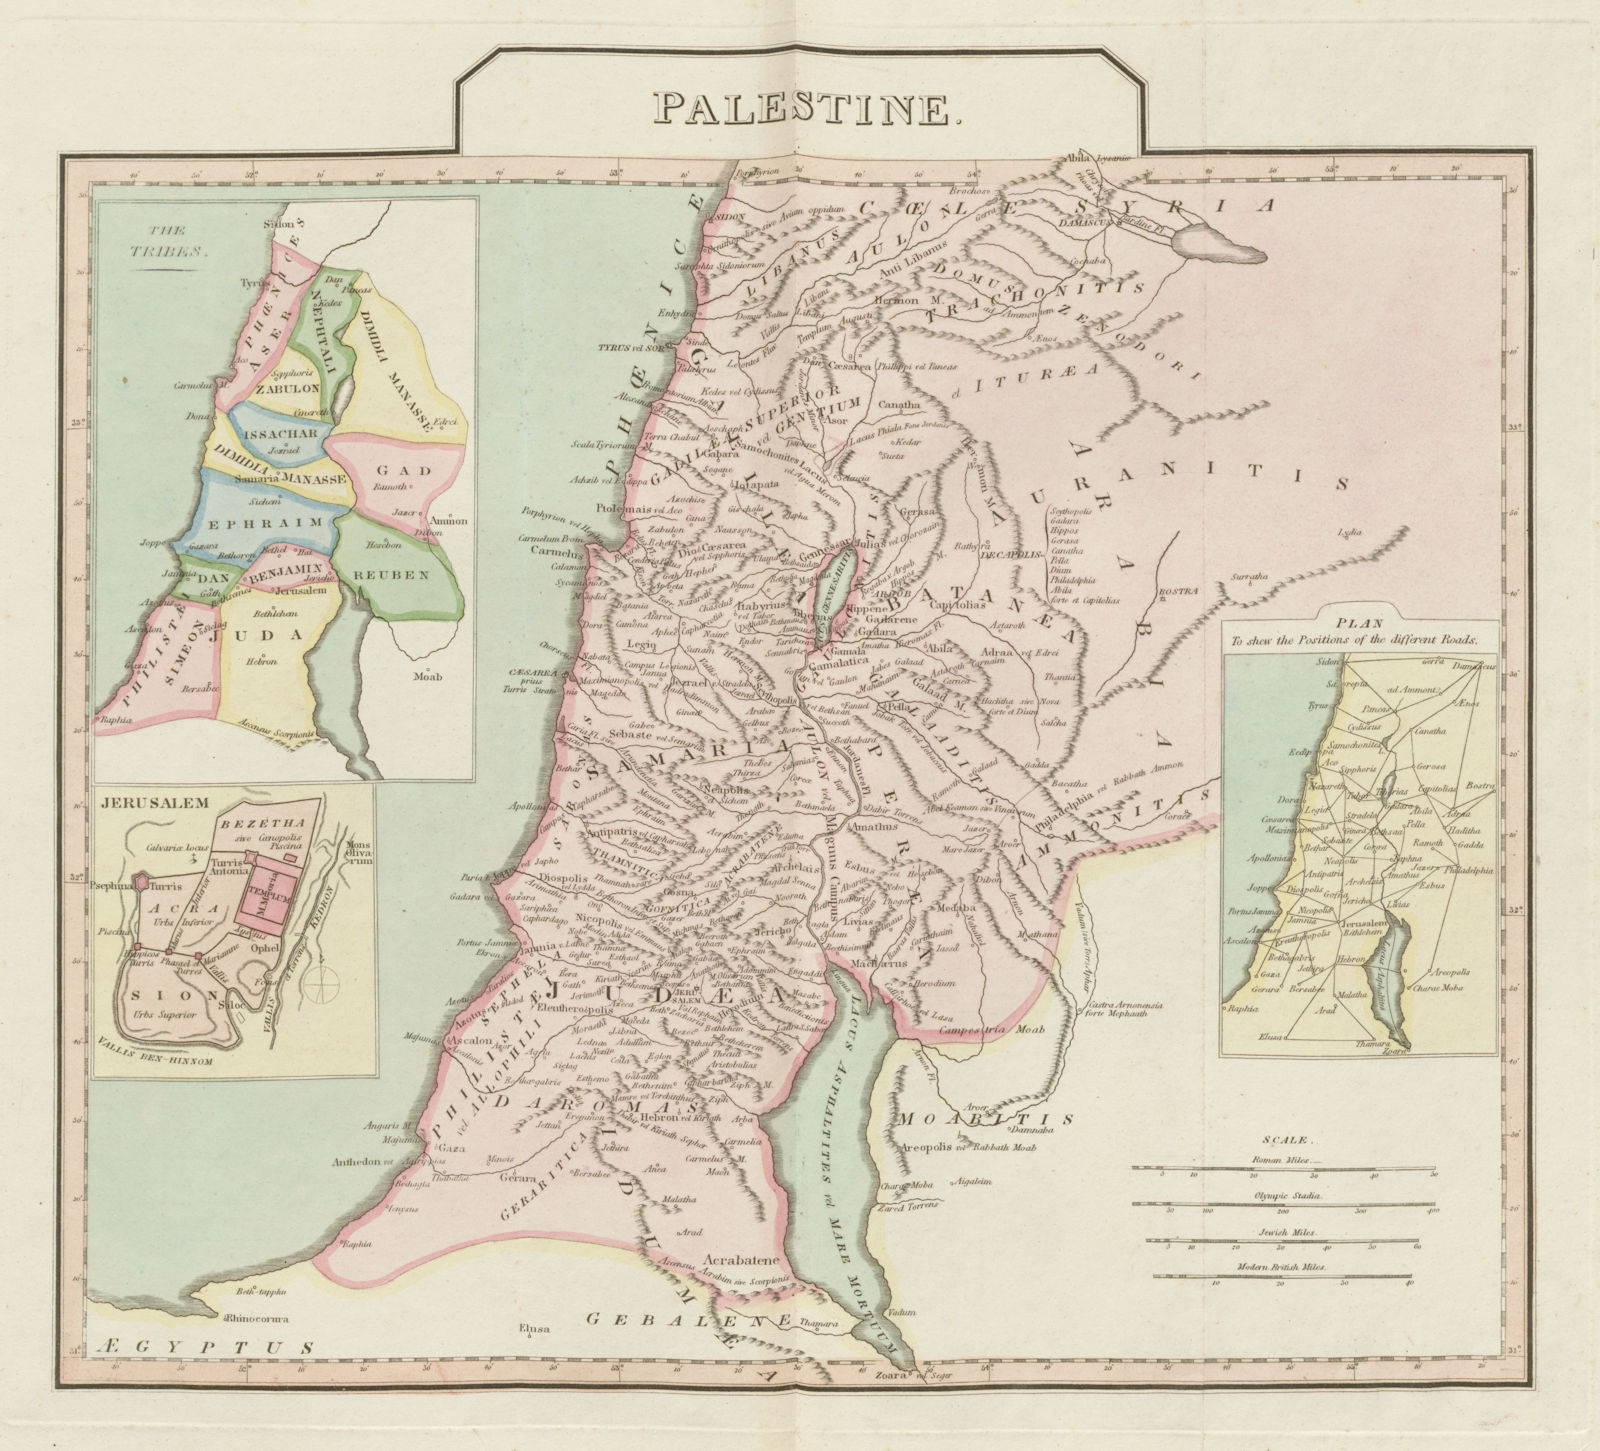 Ancient "Palestine". Tribes of Israel. Holy Land. D'ANVILLE 1815 old map